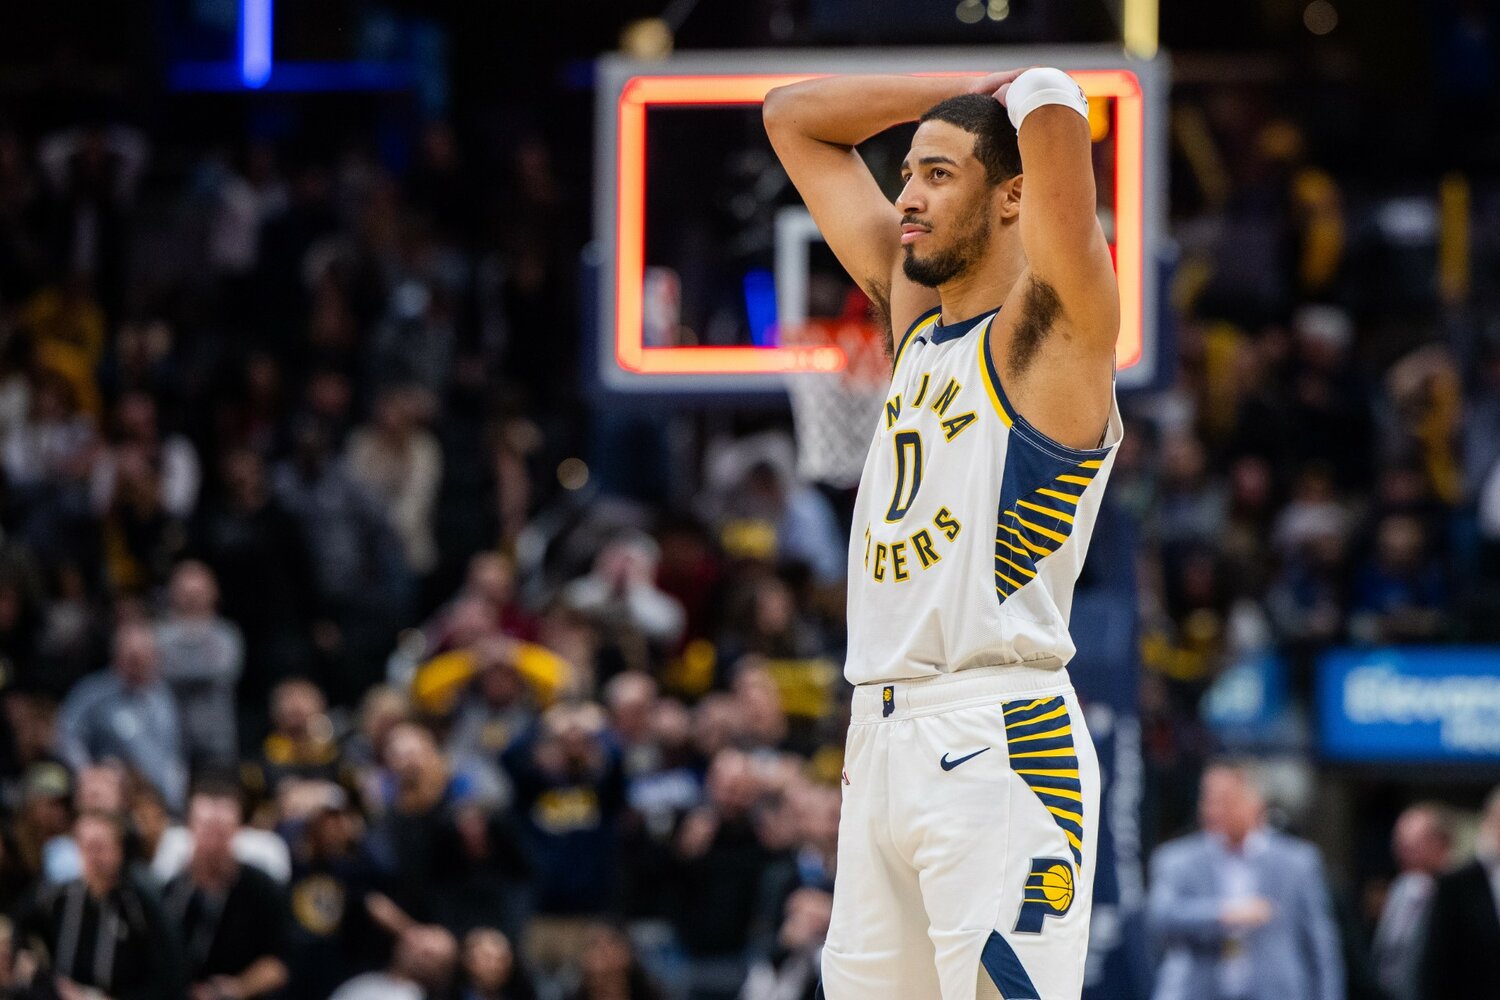 The Indiana Pacers have their franchise cornerstone in point guard Tyrese Haliburton who is quickly emerging as one of the best point guards in the NBA.